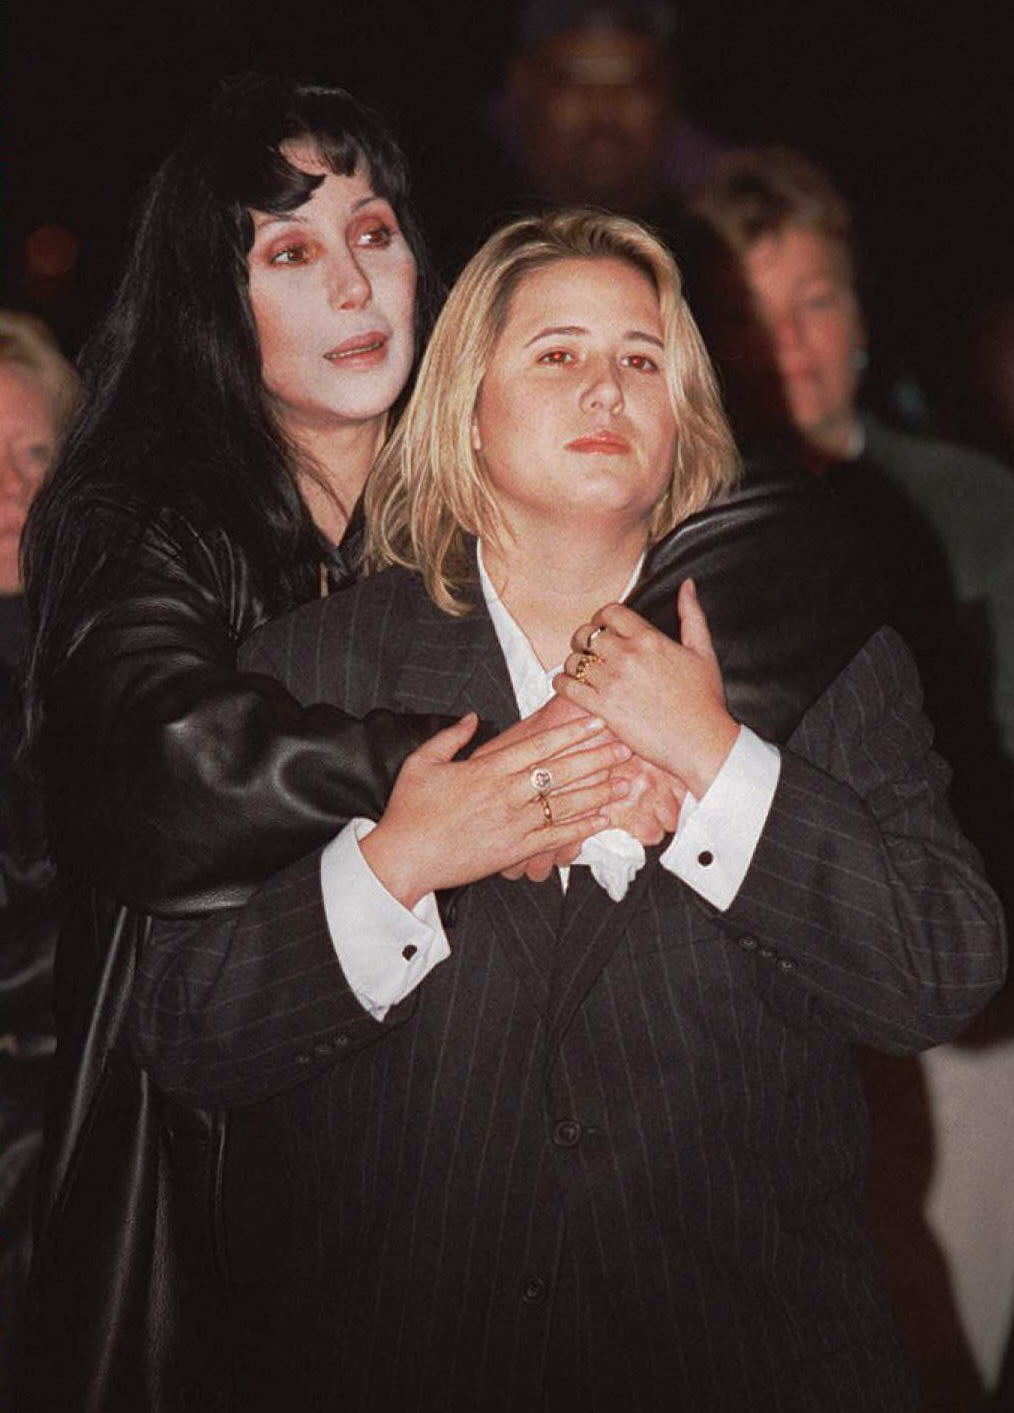 Cher comforts Chastity Bono during a rally for "National Coming Out Day" in Washington DC, on October 11, 1996. | Source: Getty Images